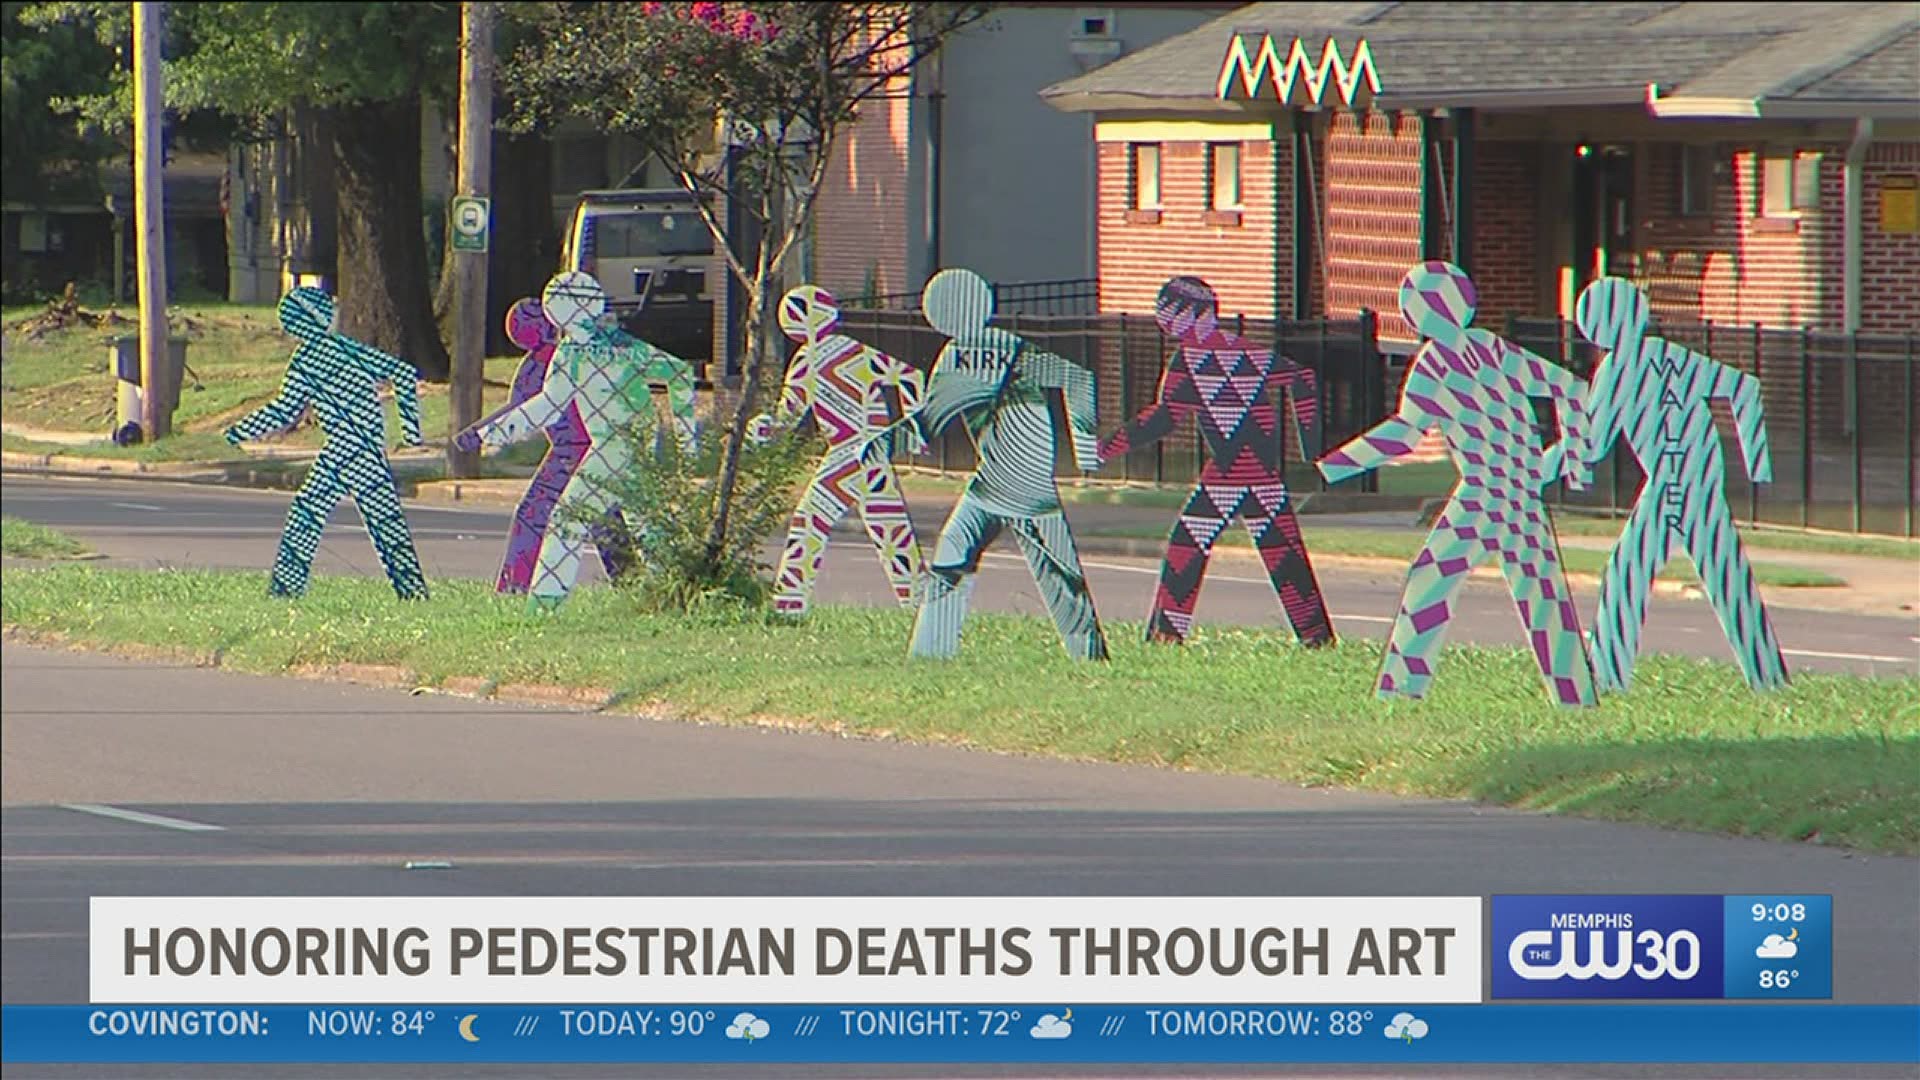 The Heights CDC commissioned artist Colin Kidder to create an art installation honoring Memphians killed walking in 2020.